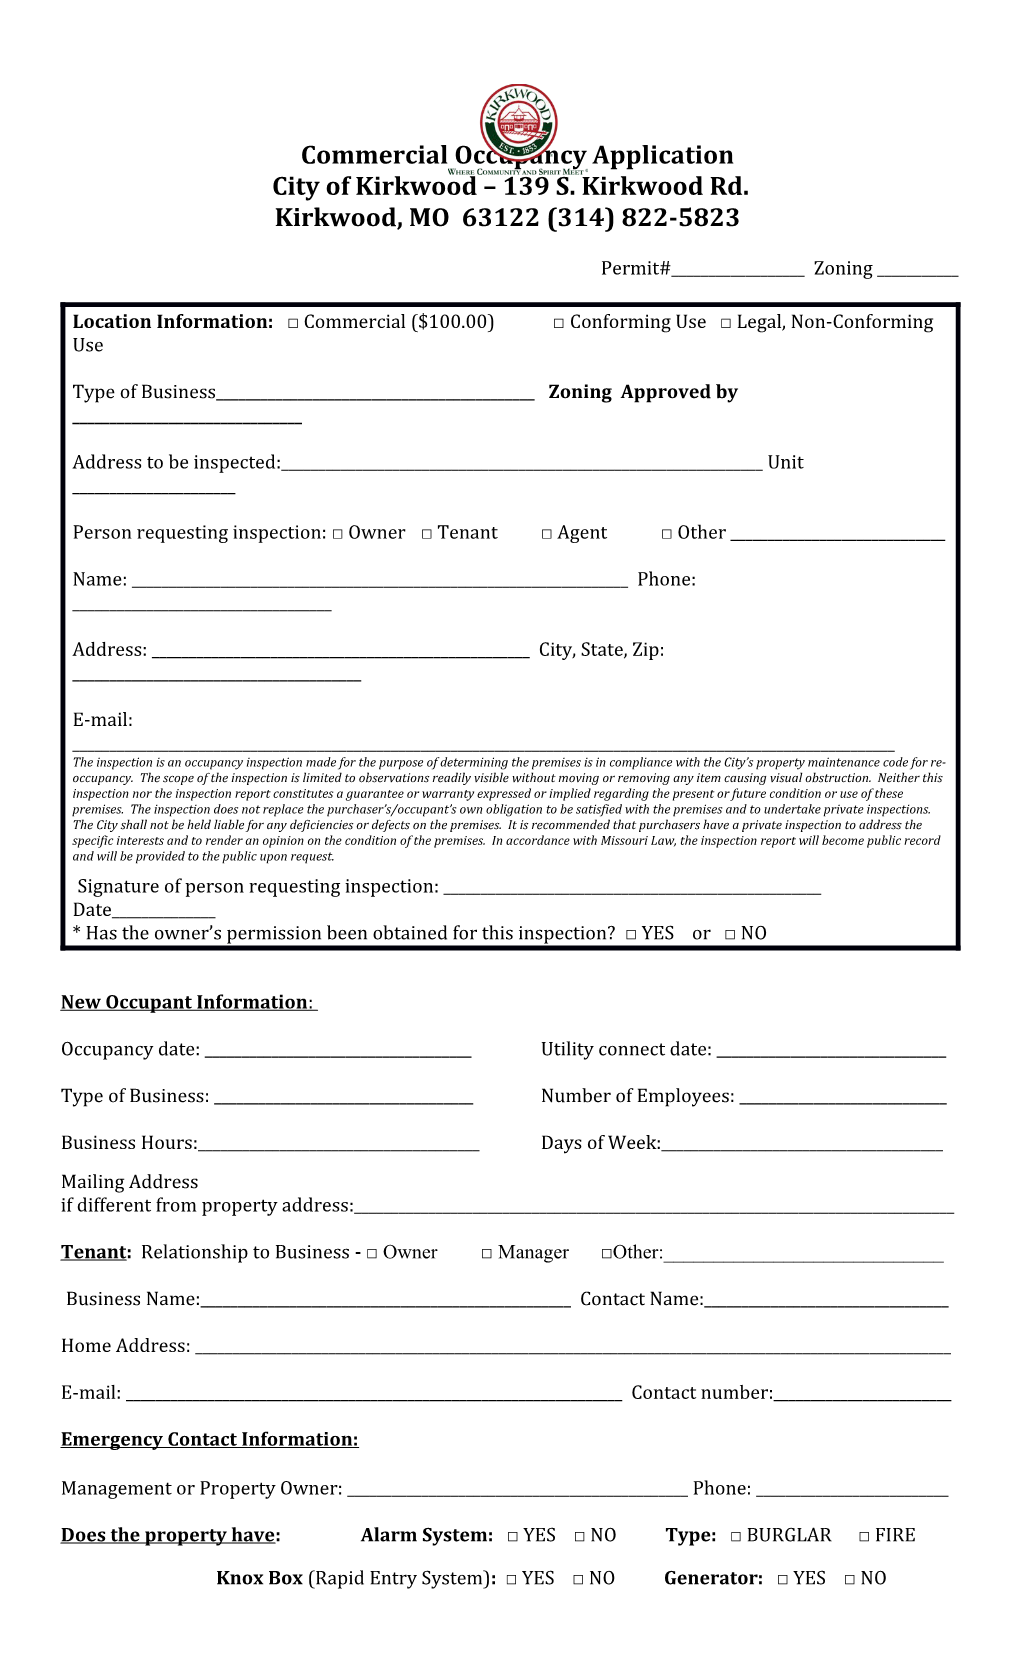 Commercial Occupancy Application